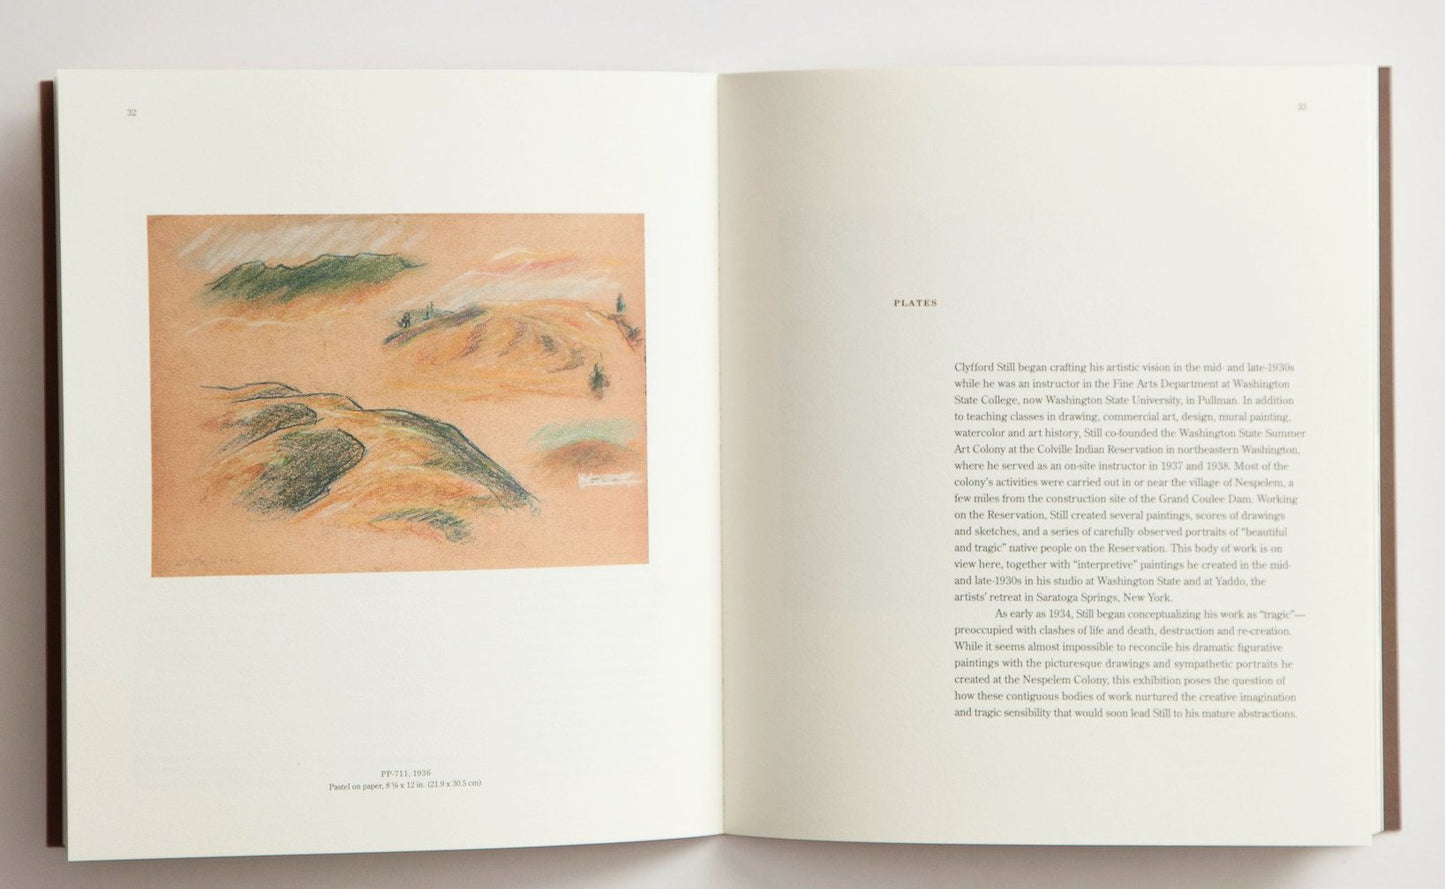 Pages 32 and 33 of ‘Clyfford Still: The Colville Reservation and Beyond, 1934-1939’ featuring pastel on paper PP-711